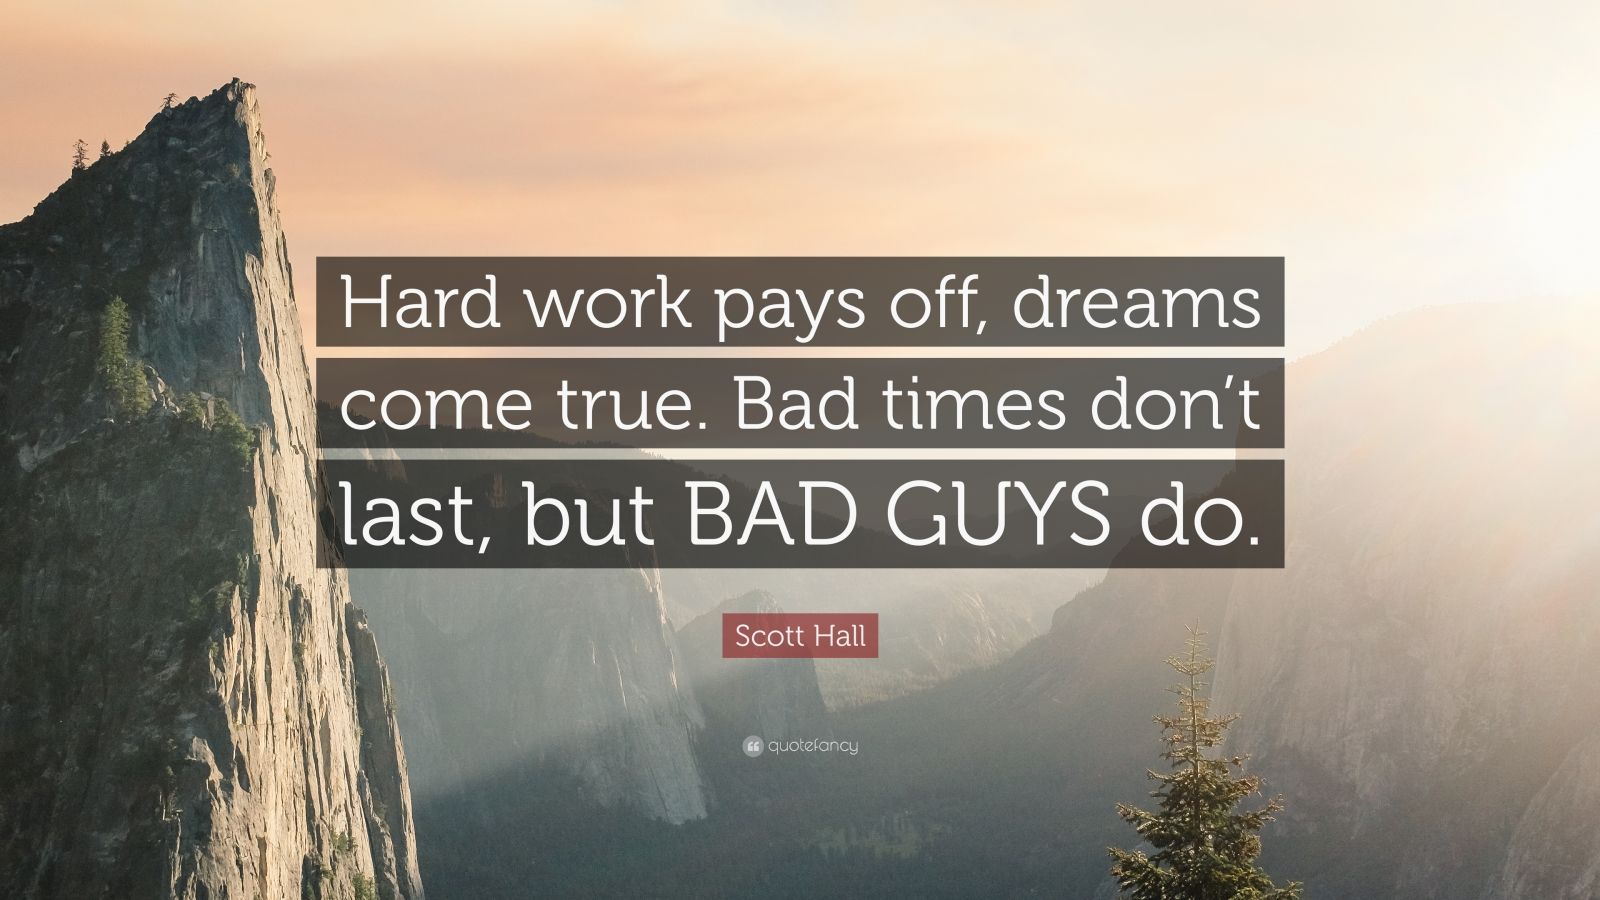 Scott Hall Quote: “Hard work pays off, dreams come true. Bad times don